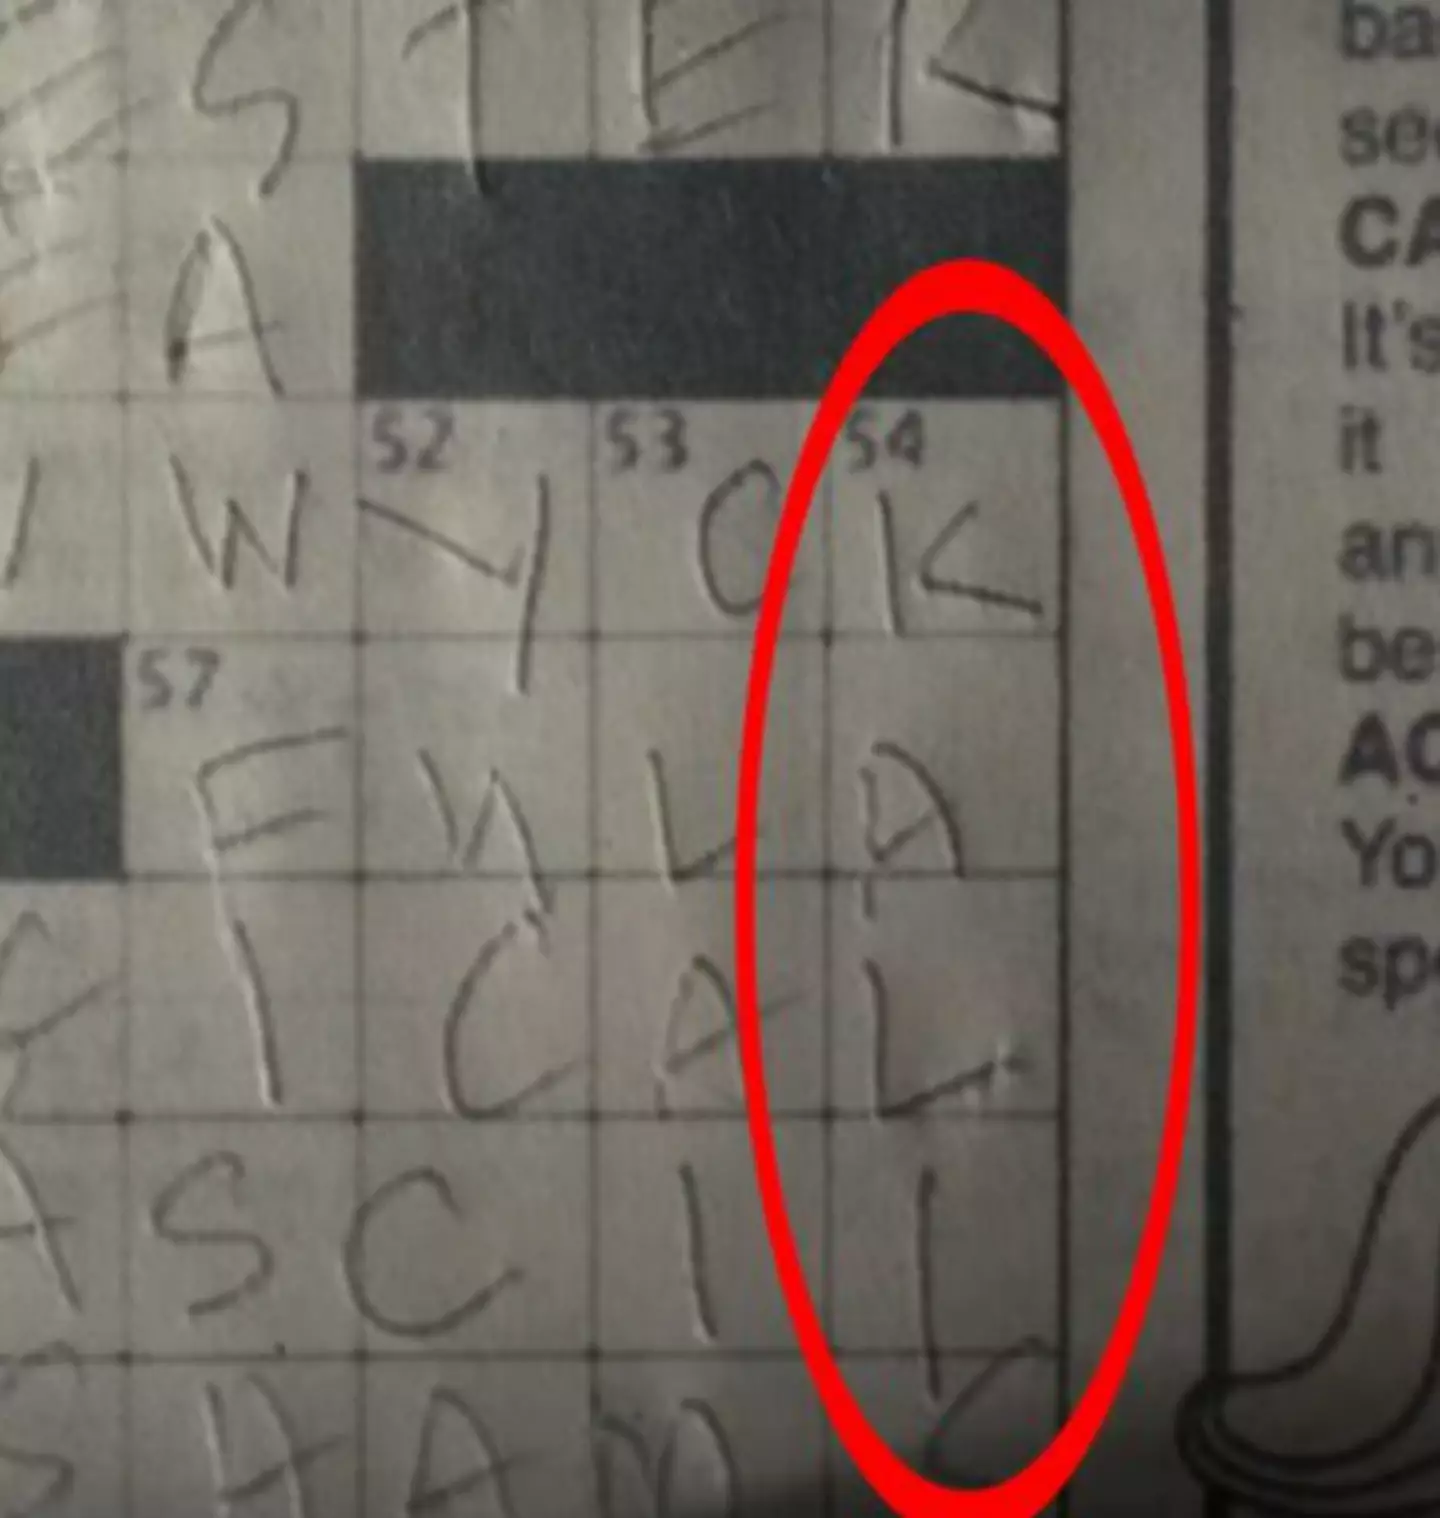 One of the answers to the crossword was 'Kali' (